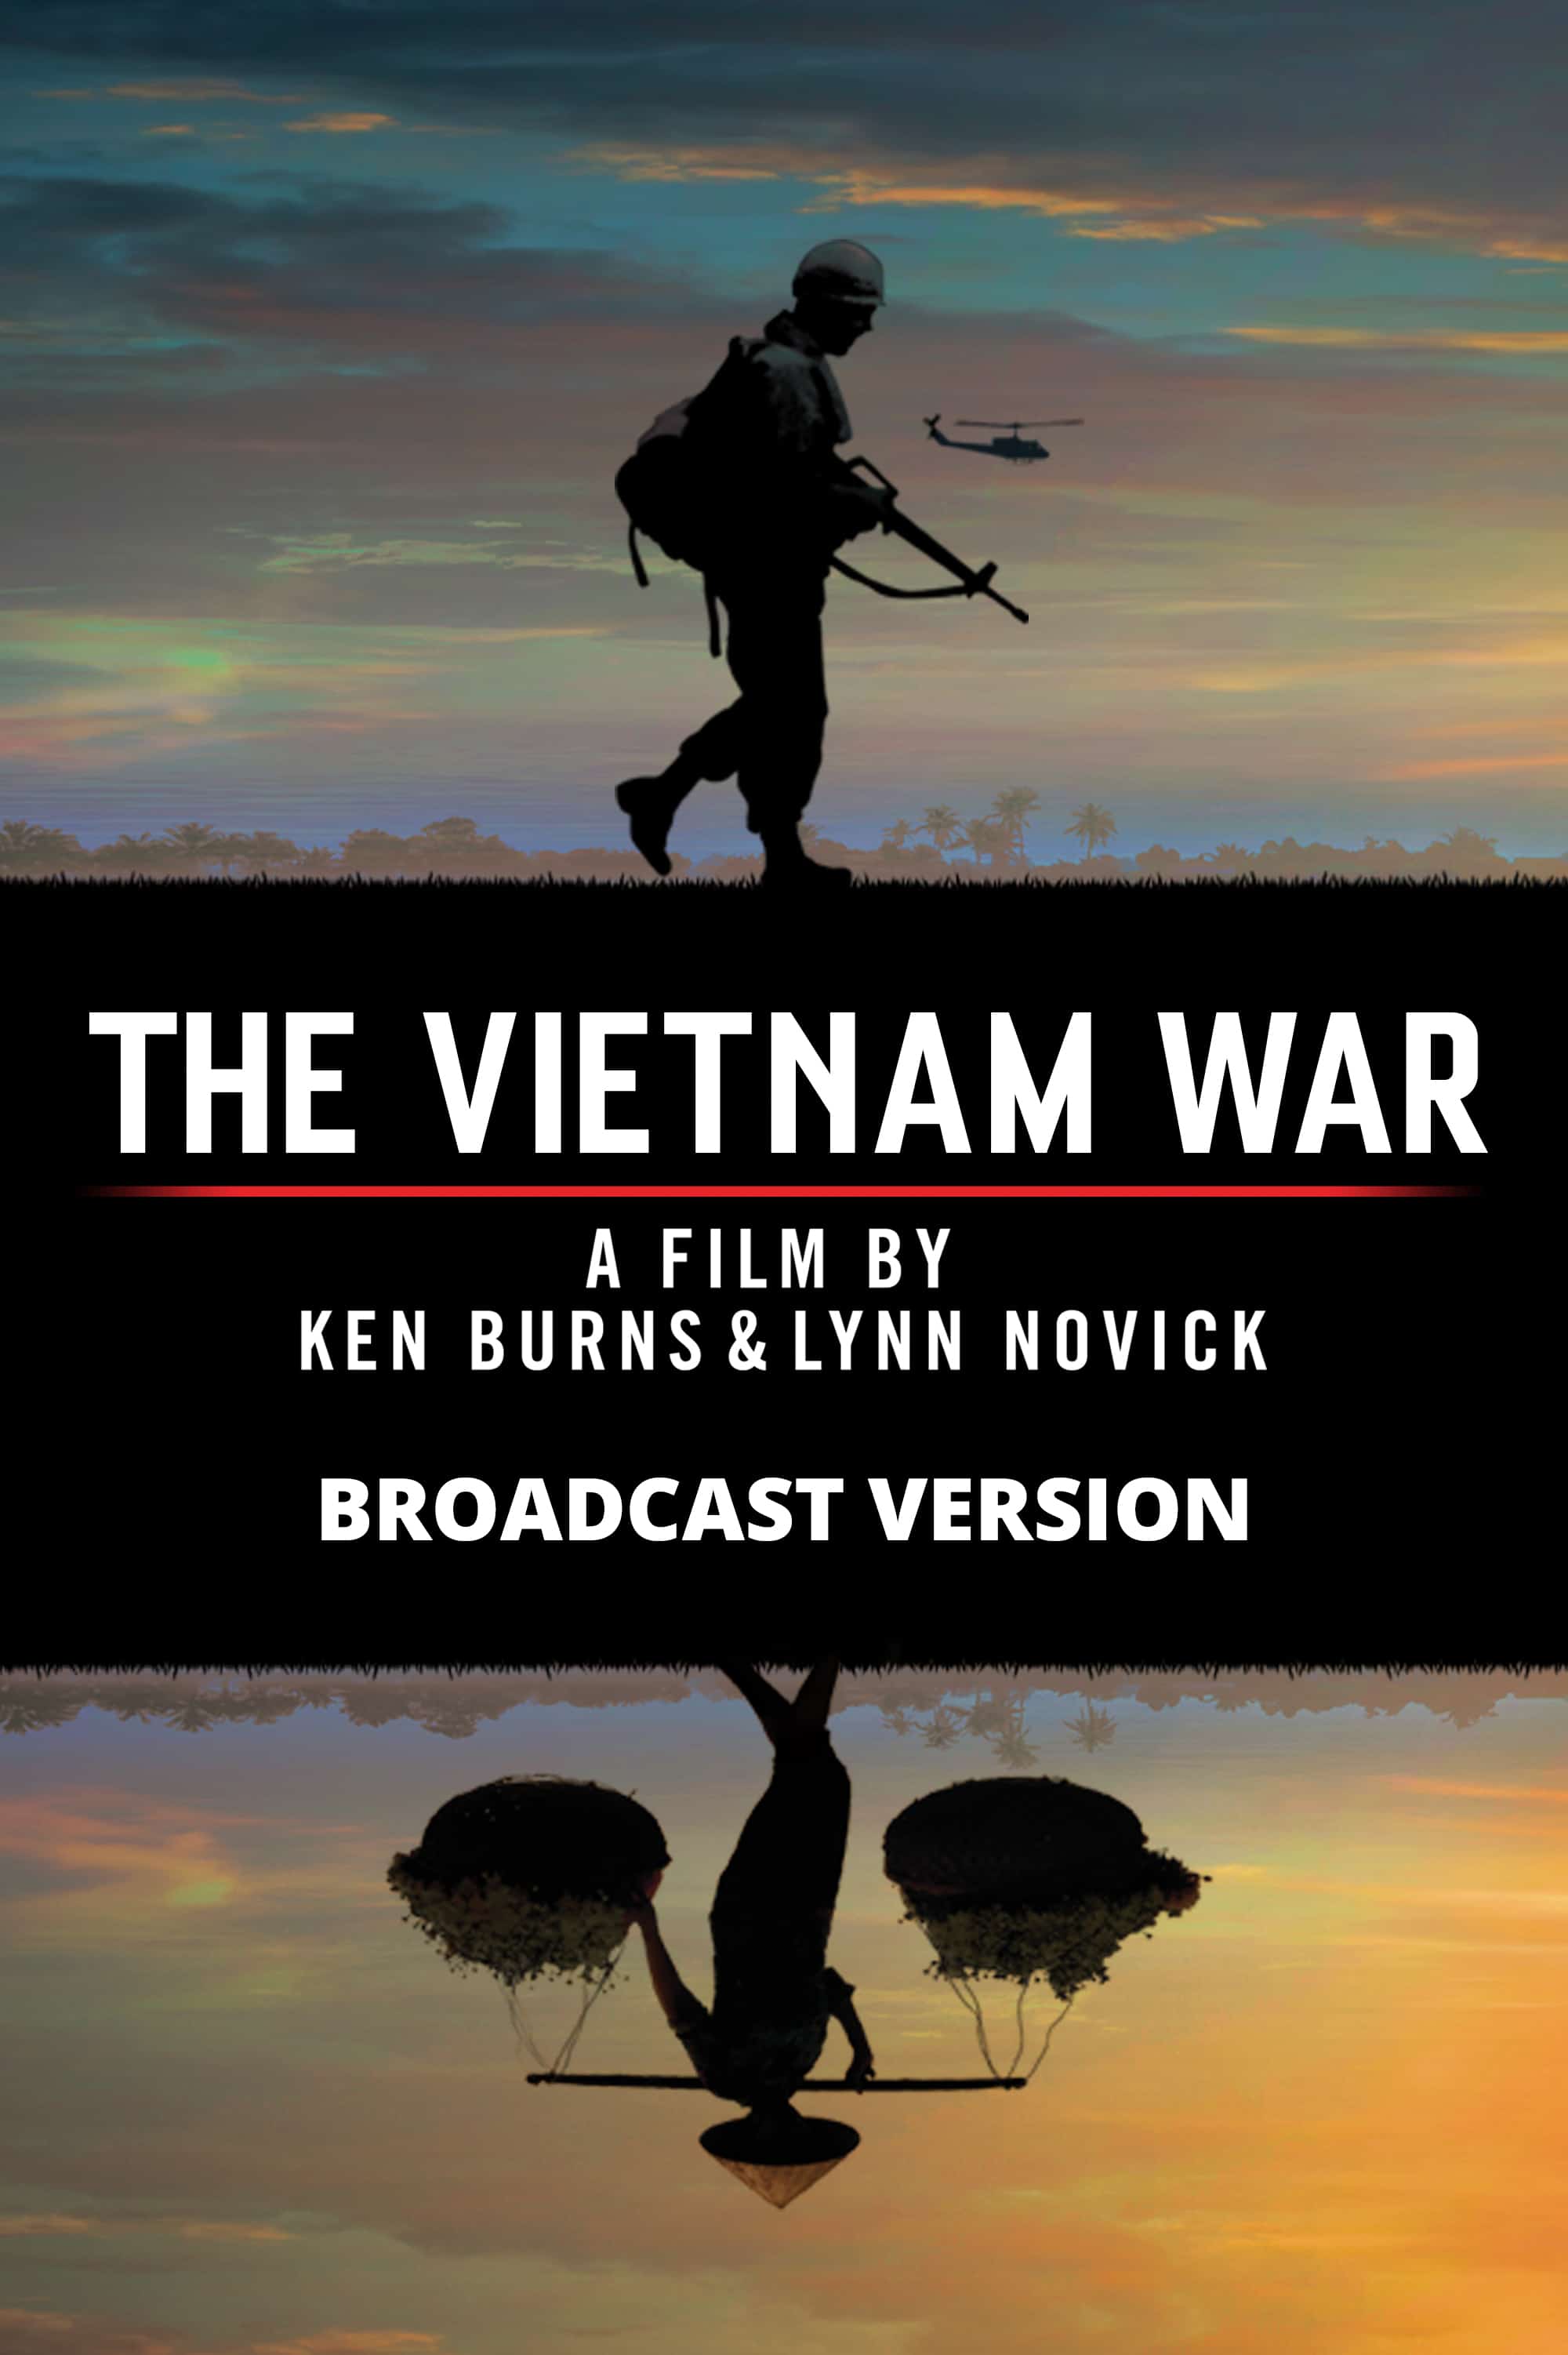 The Future and The Past: Ken Burns and Lynn Novick's The Vietnam War